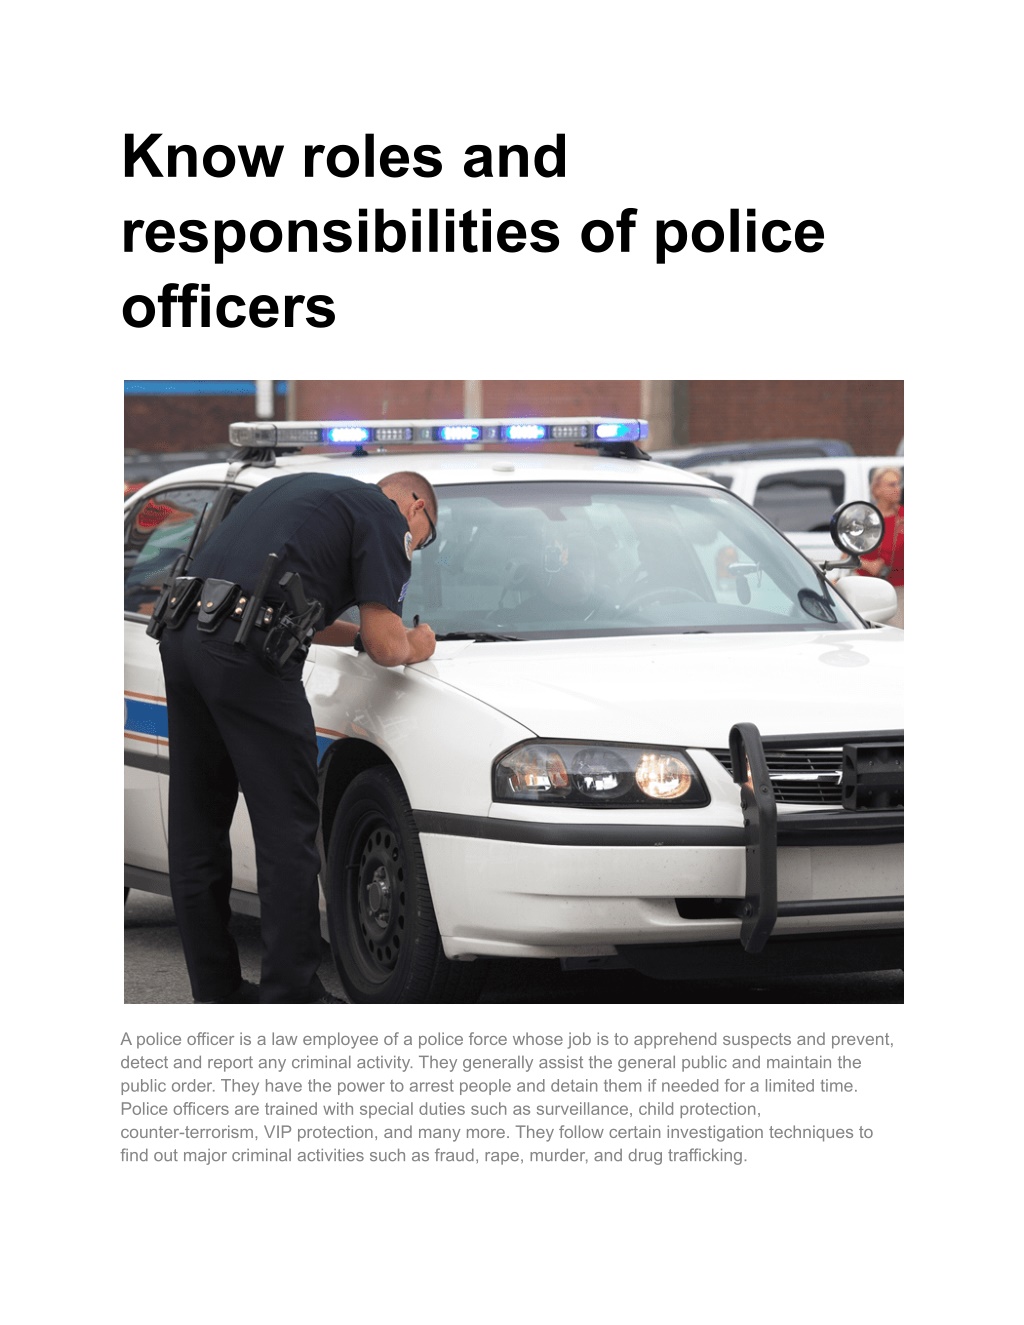 Ppt Know Roles And Responsibilities Of Police Officers Powerpoint Presentation Id11424782 